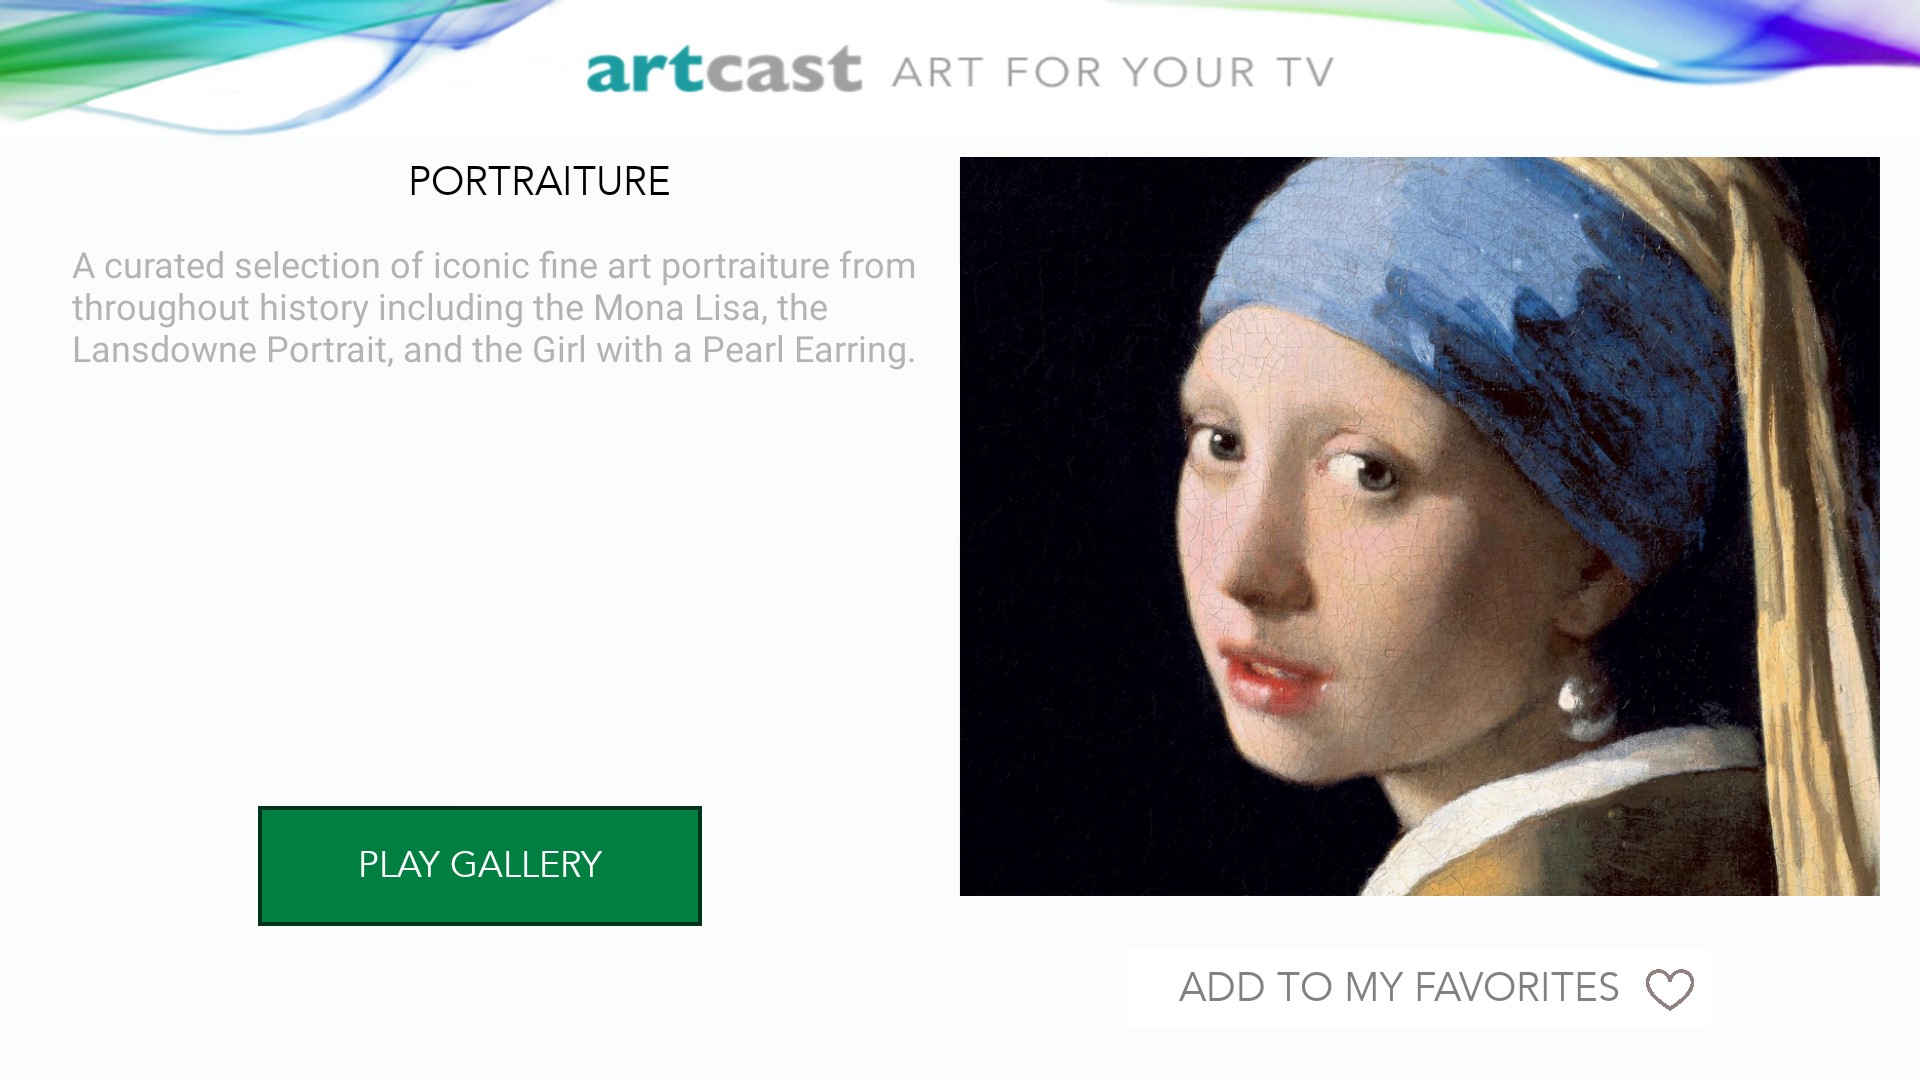 turn-your-home-theater-into-an-art-gallery-with-artcast